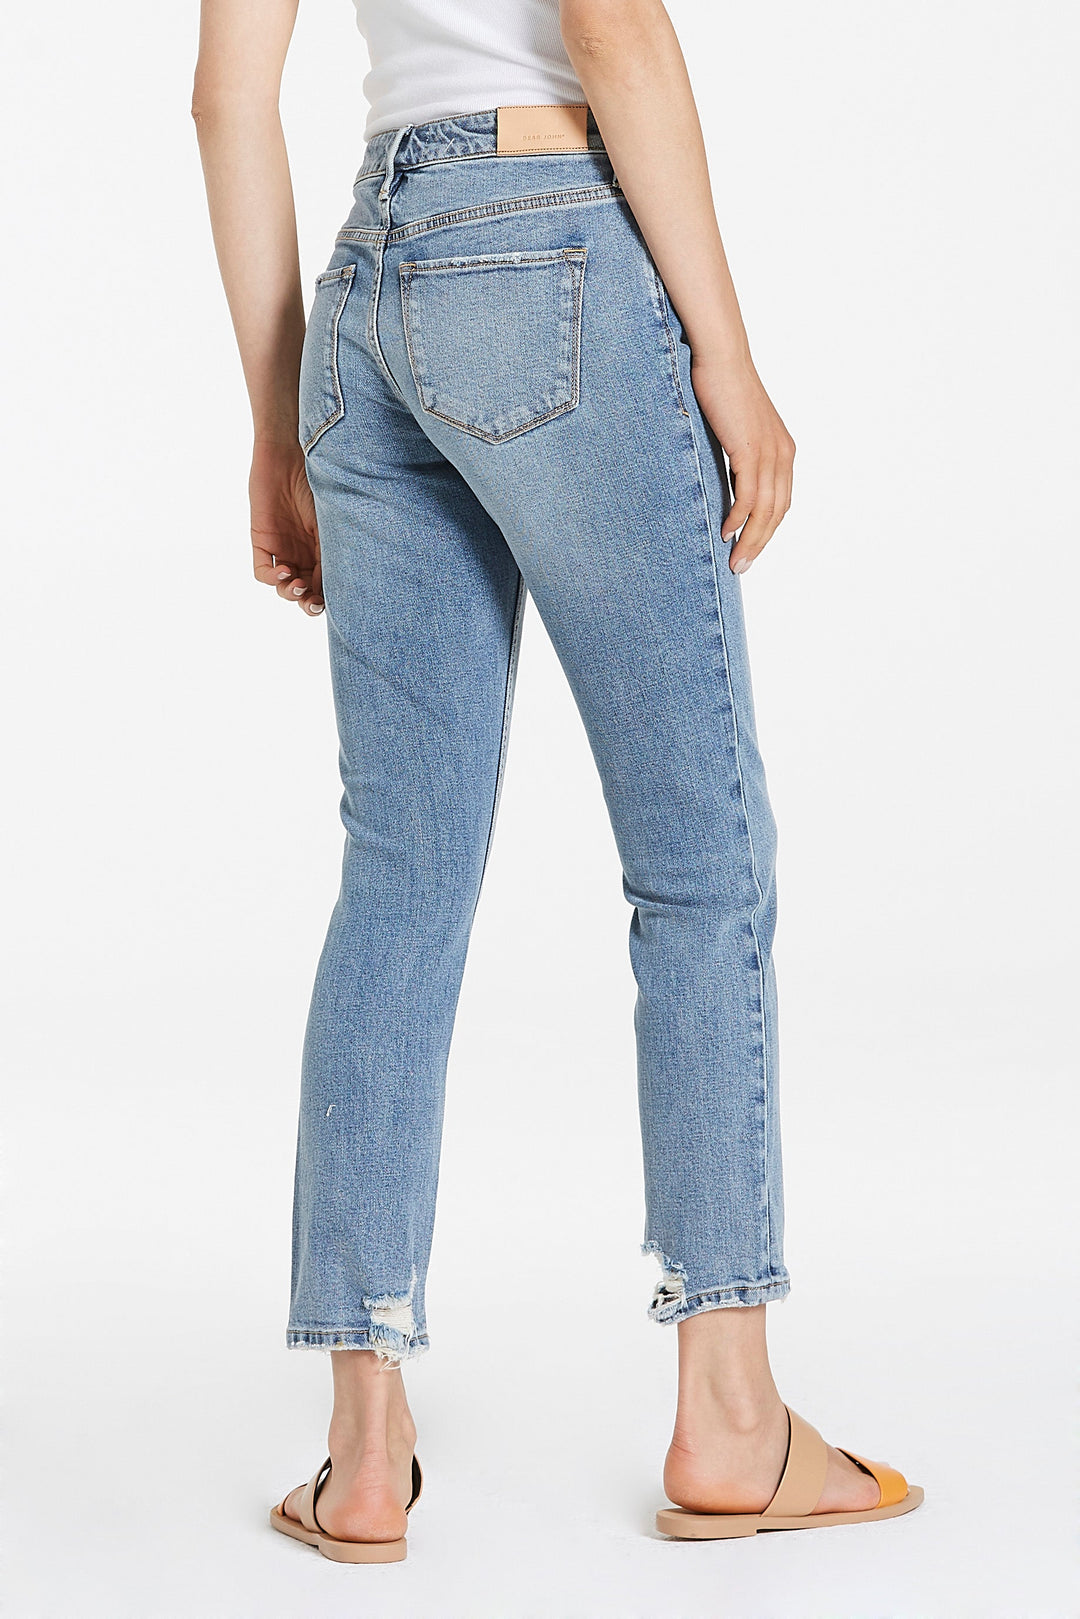 image of a female model wearing a AIDEN HIGH RISE GIRLFRIEND JEANS ROCK SPRINGS JEANS